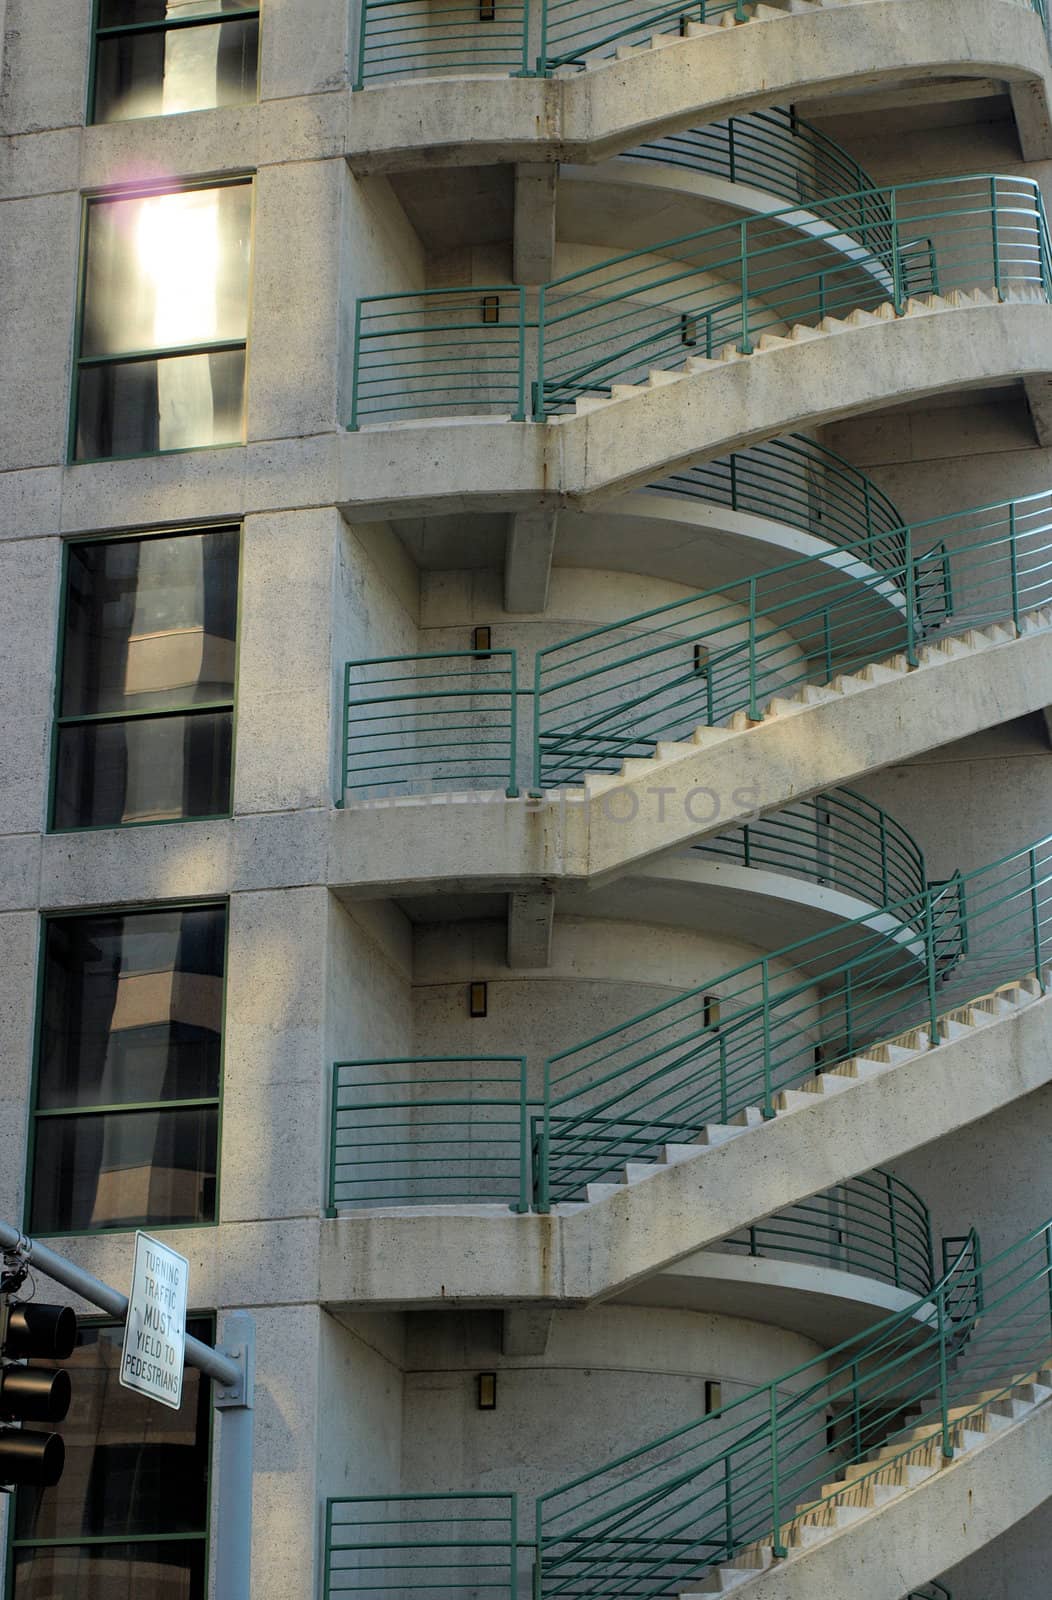 A parking deck in greensboro with stairs leading up